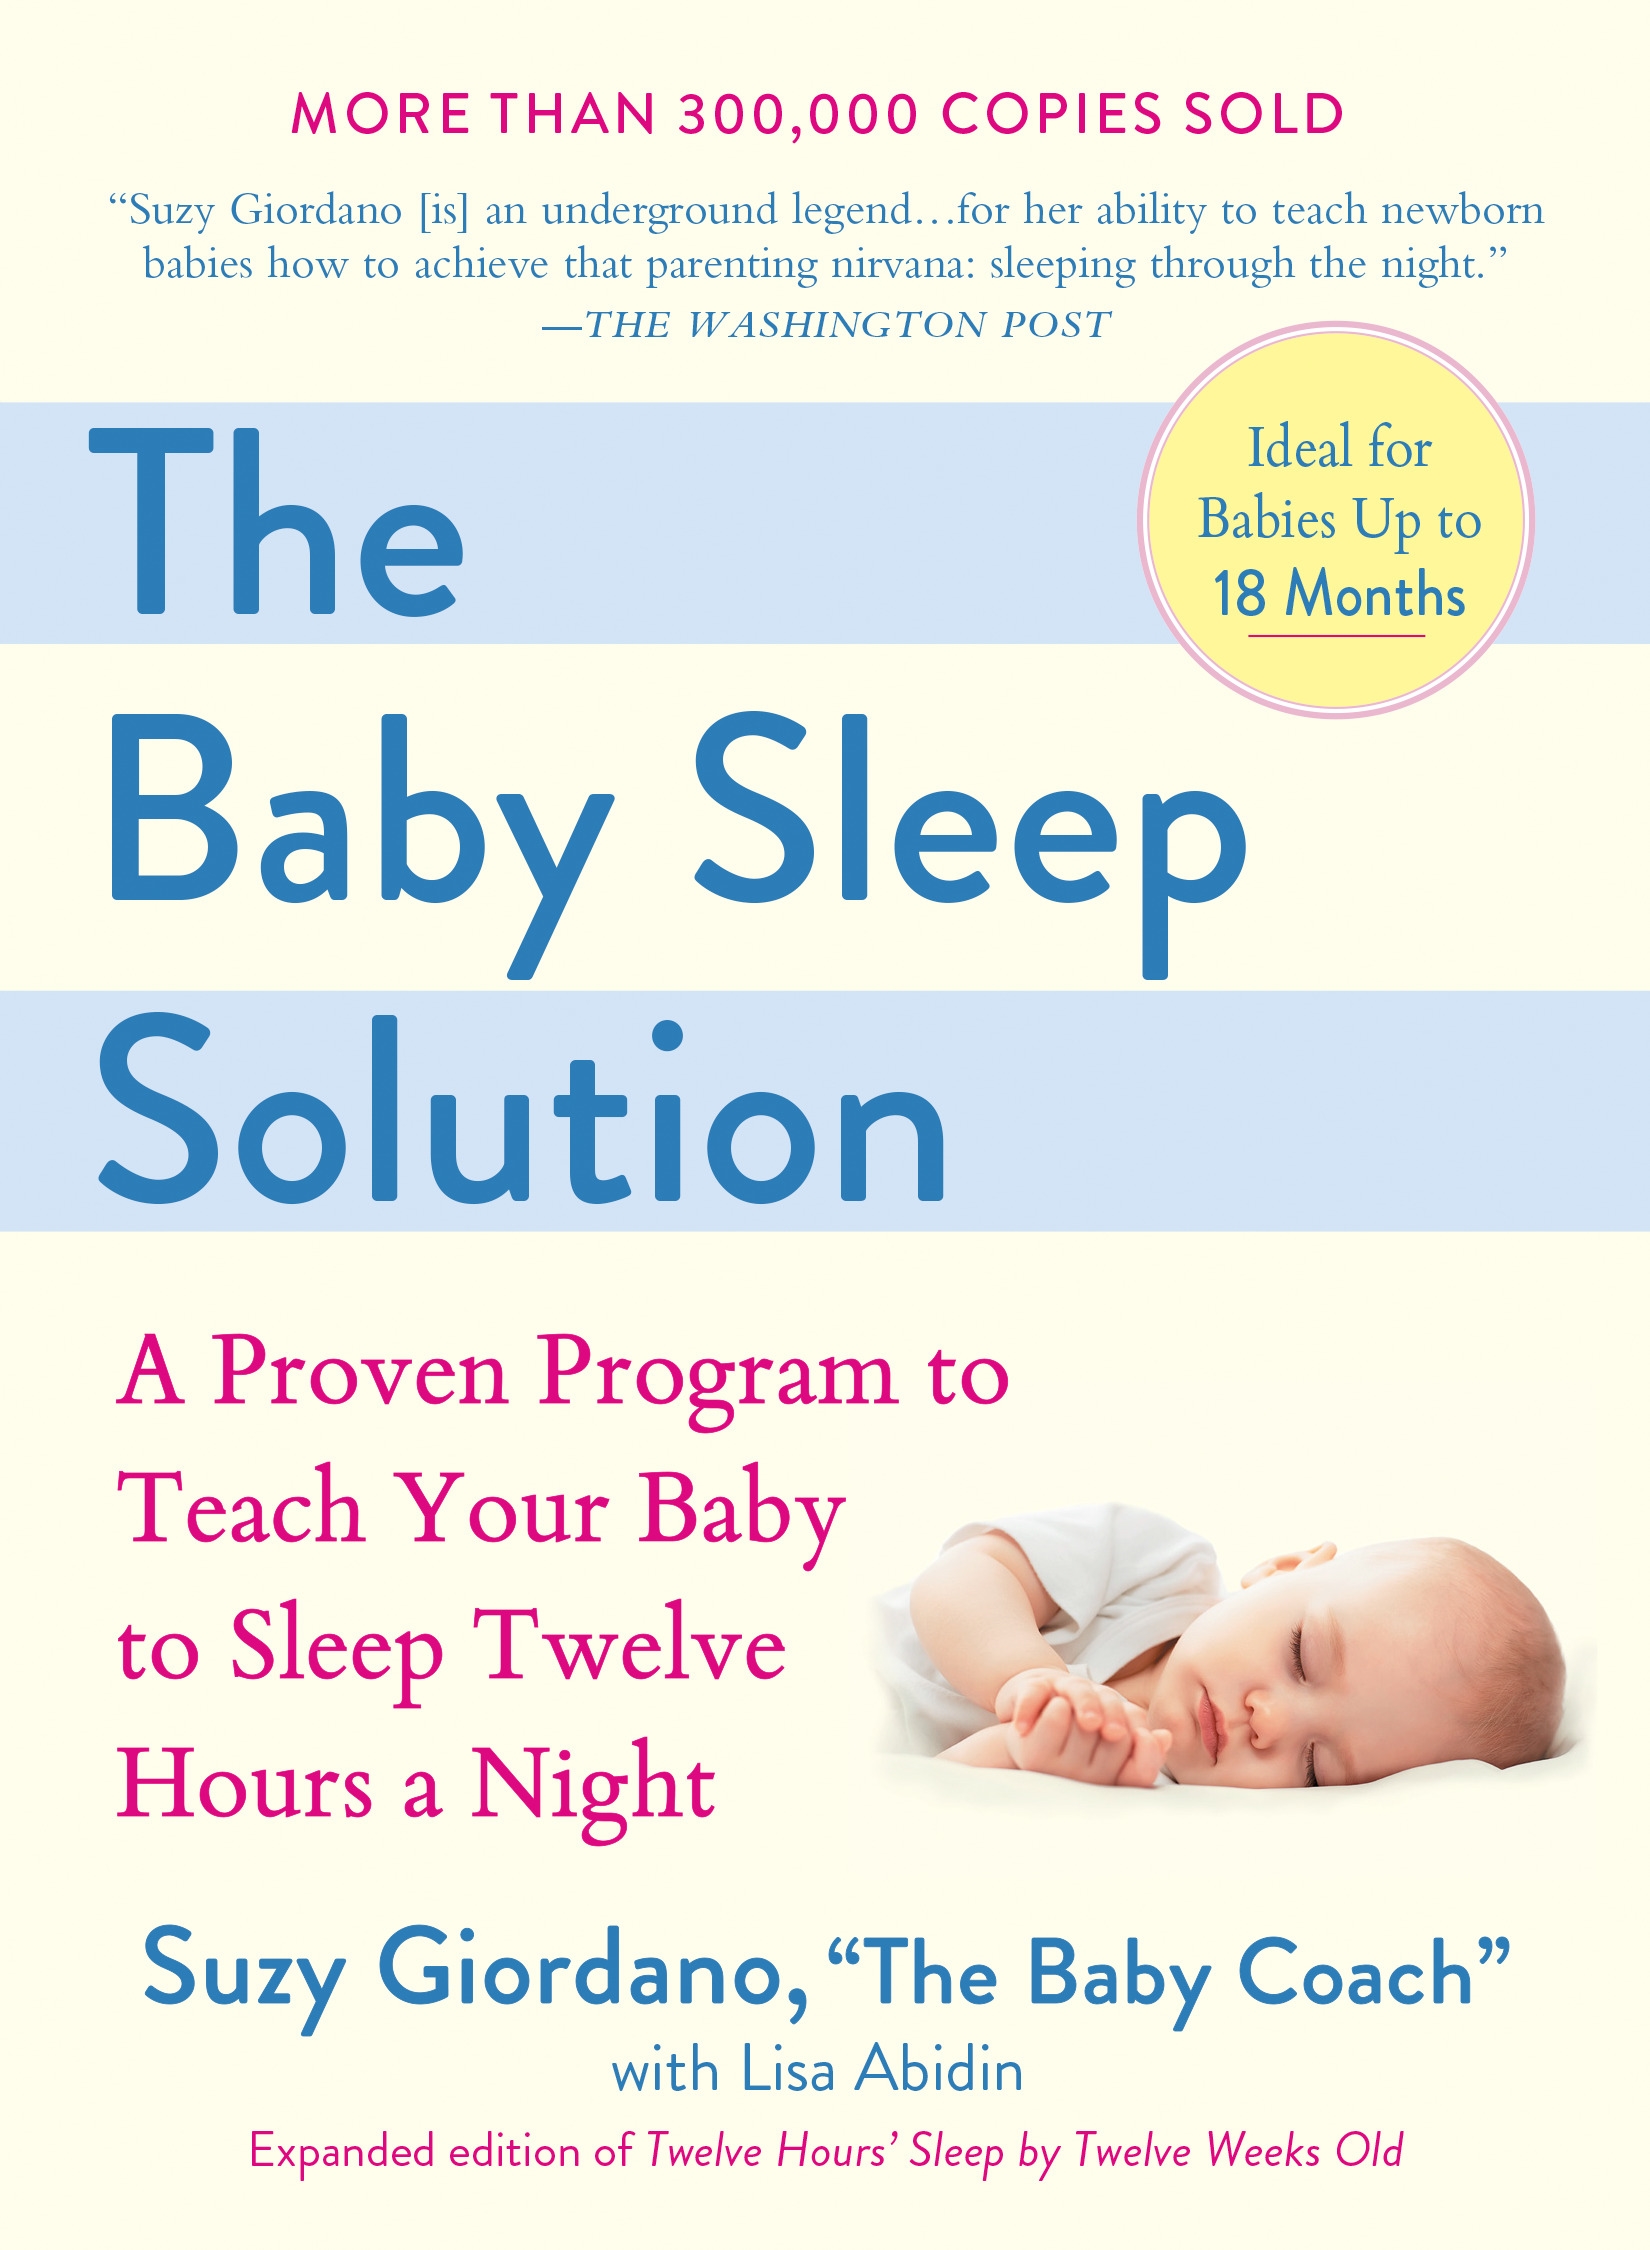 Sleep Challenges for Older Babies Aged 9-18 Months - The Sleep Store NZ